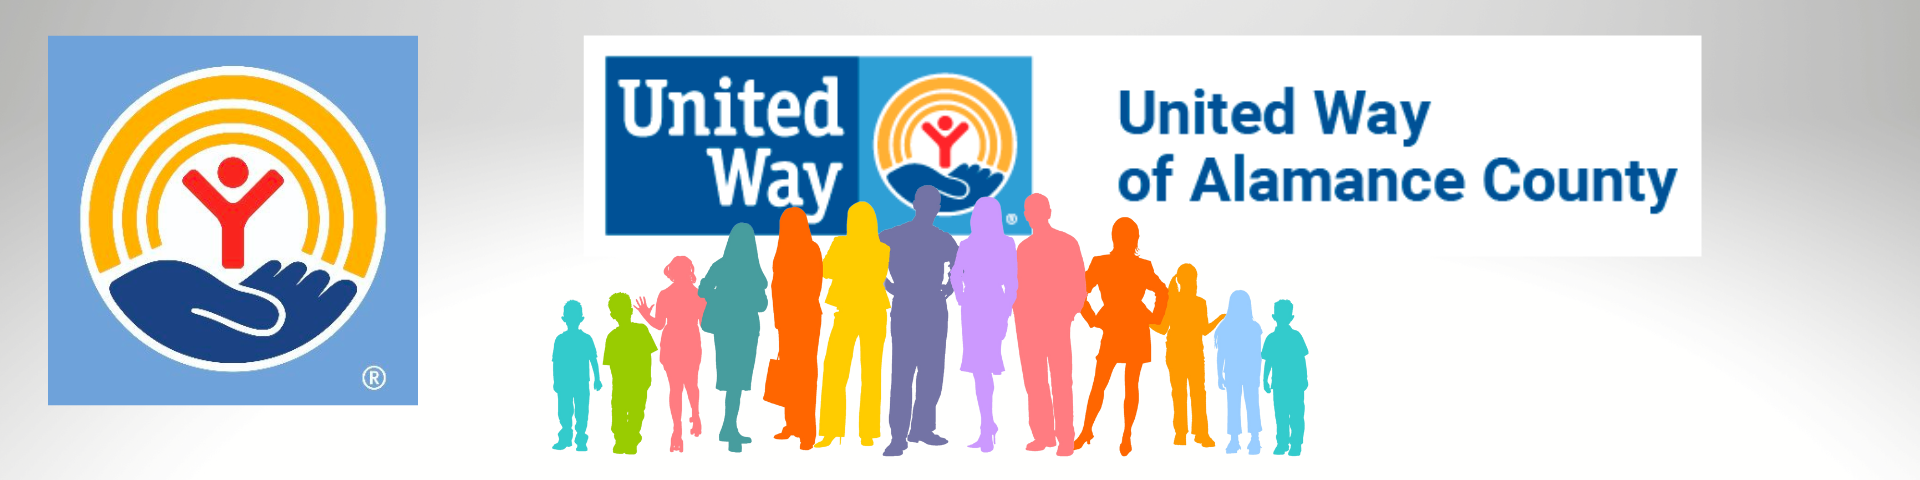 United Way logo showing an open hand and sun graphic with United Way text and United Way Alamance County version with a silhouette illustration of a group of people in the foreground